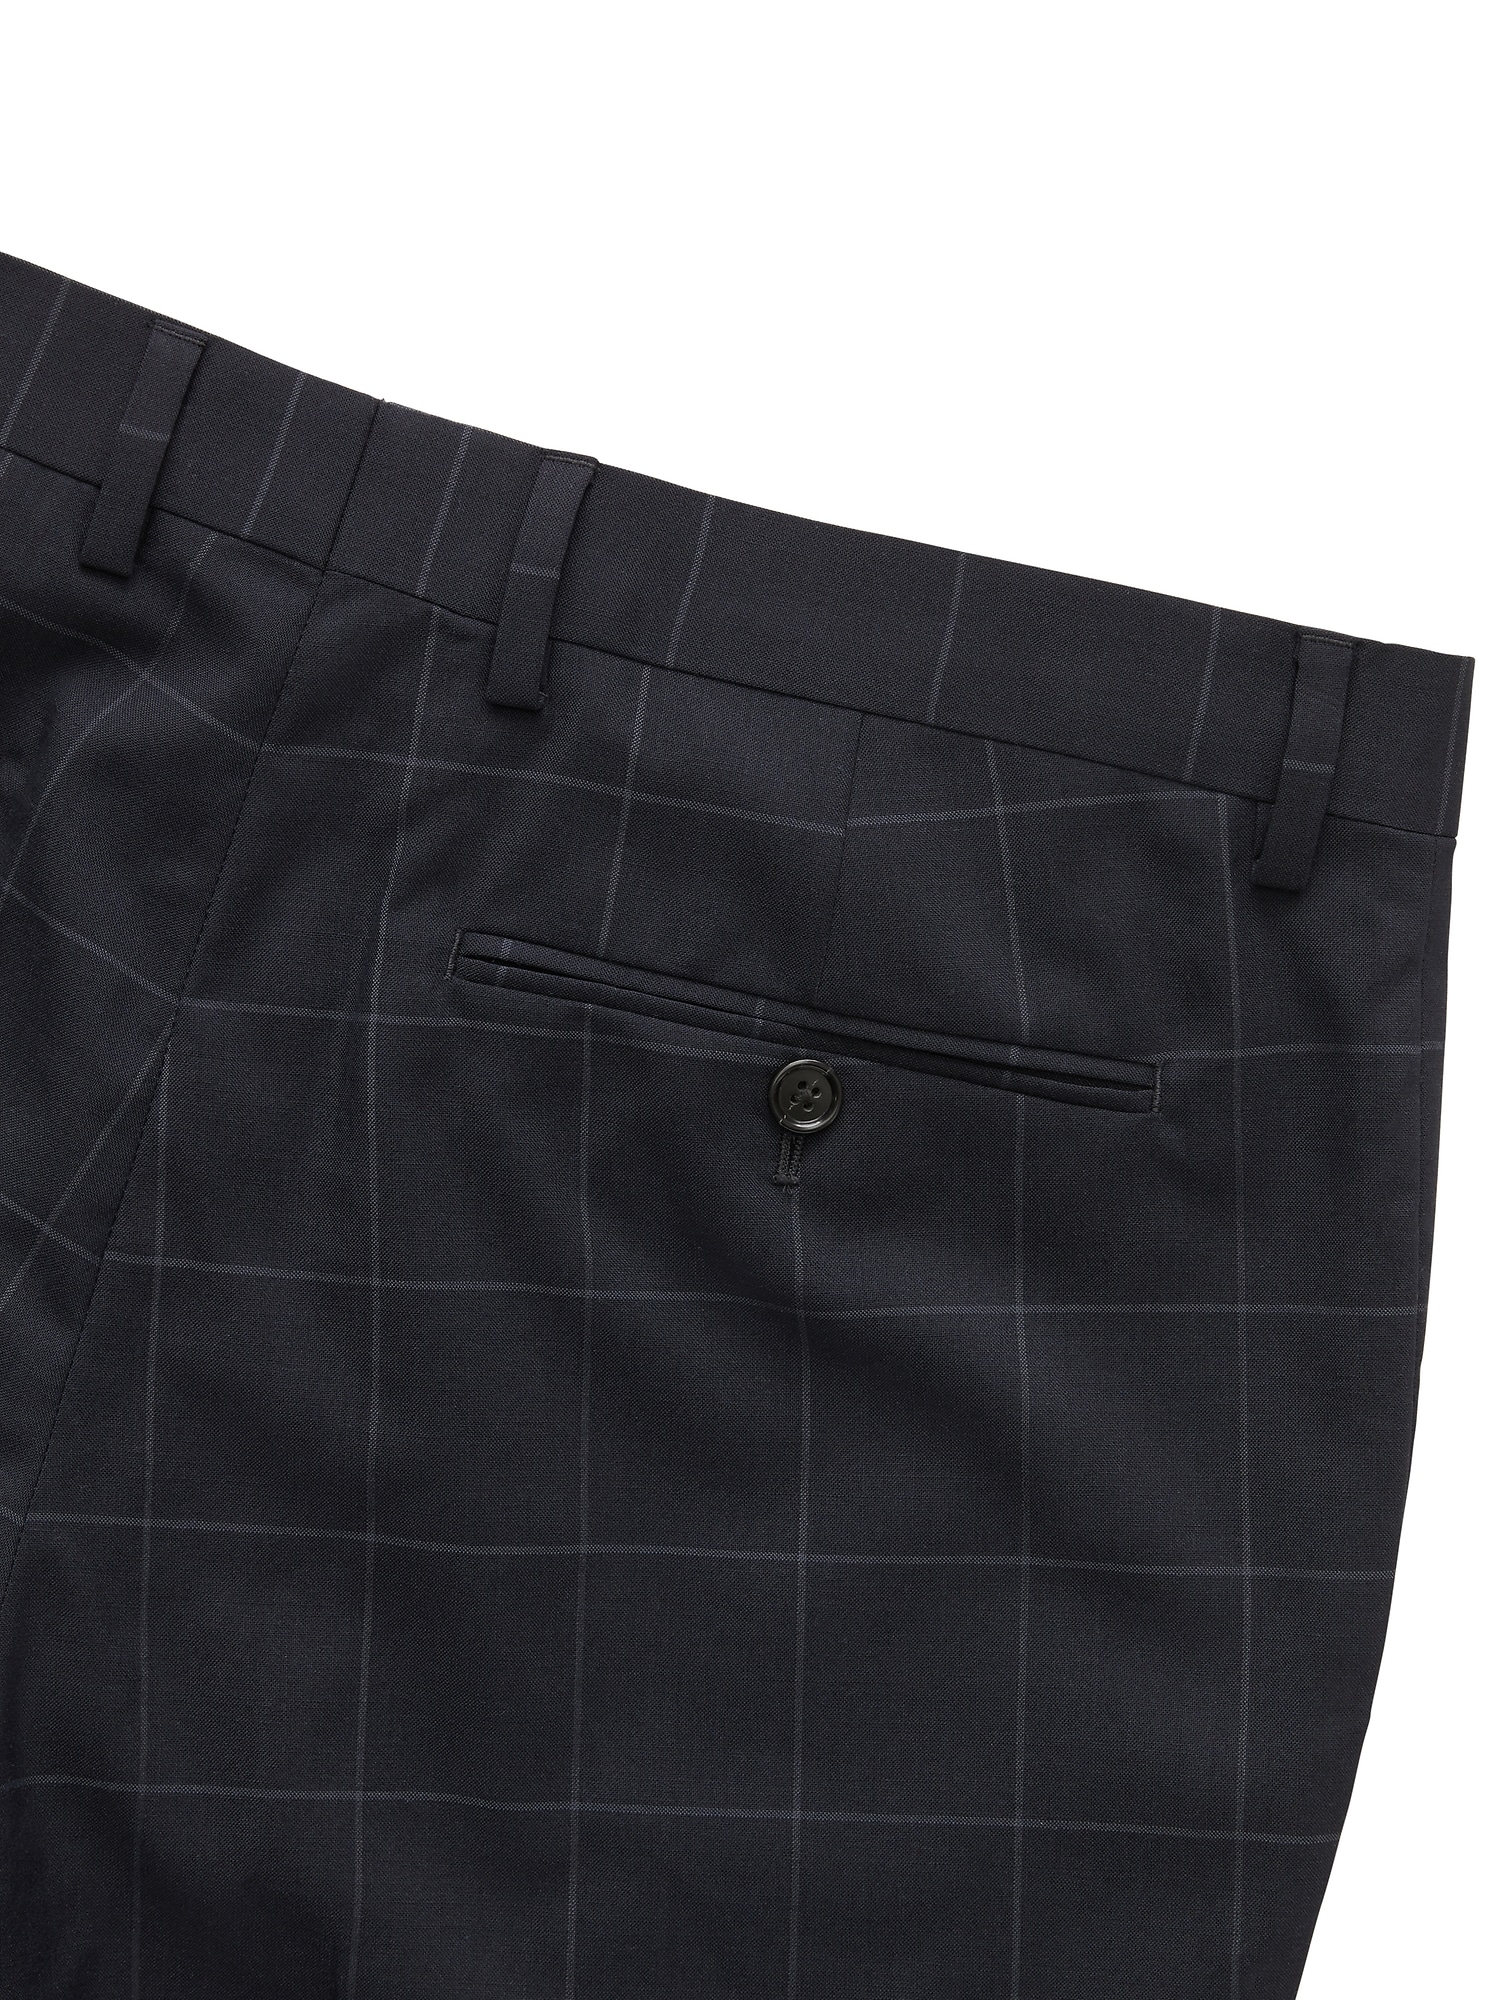 Slim Navy Smart-Weight Performance Wool Blend Suit Pant